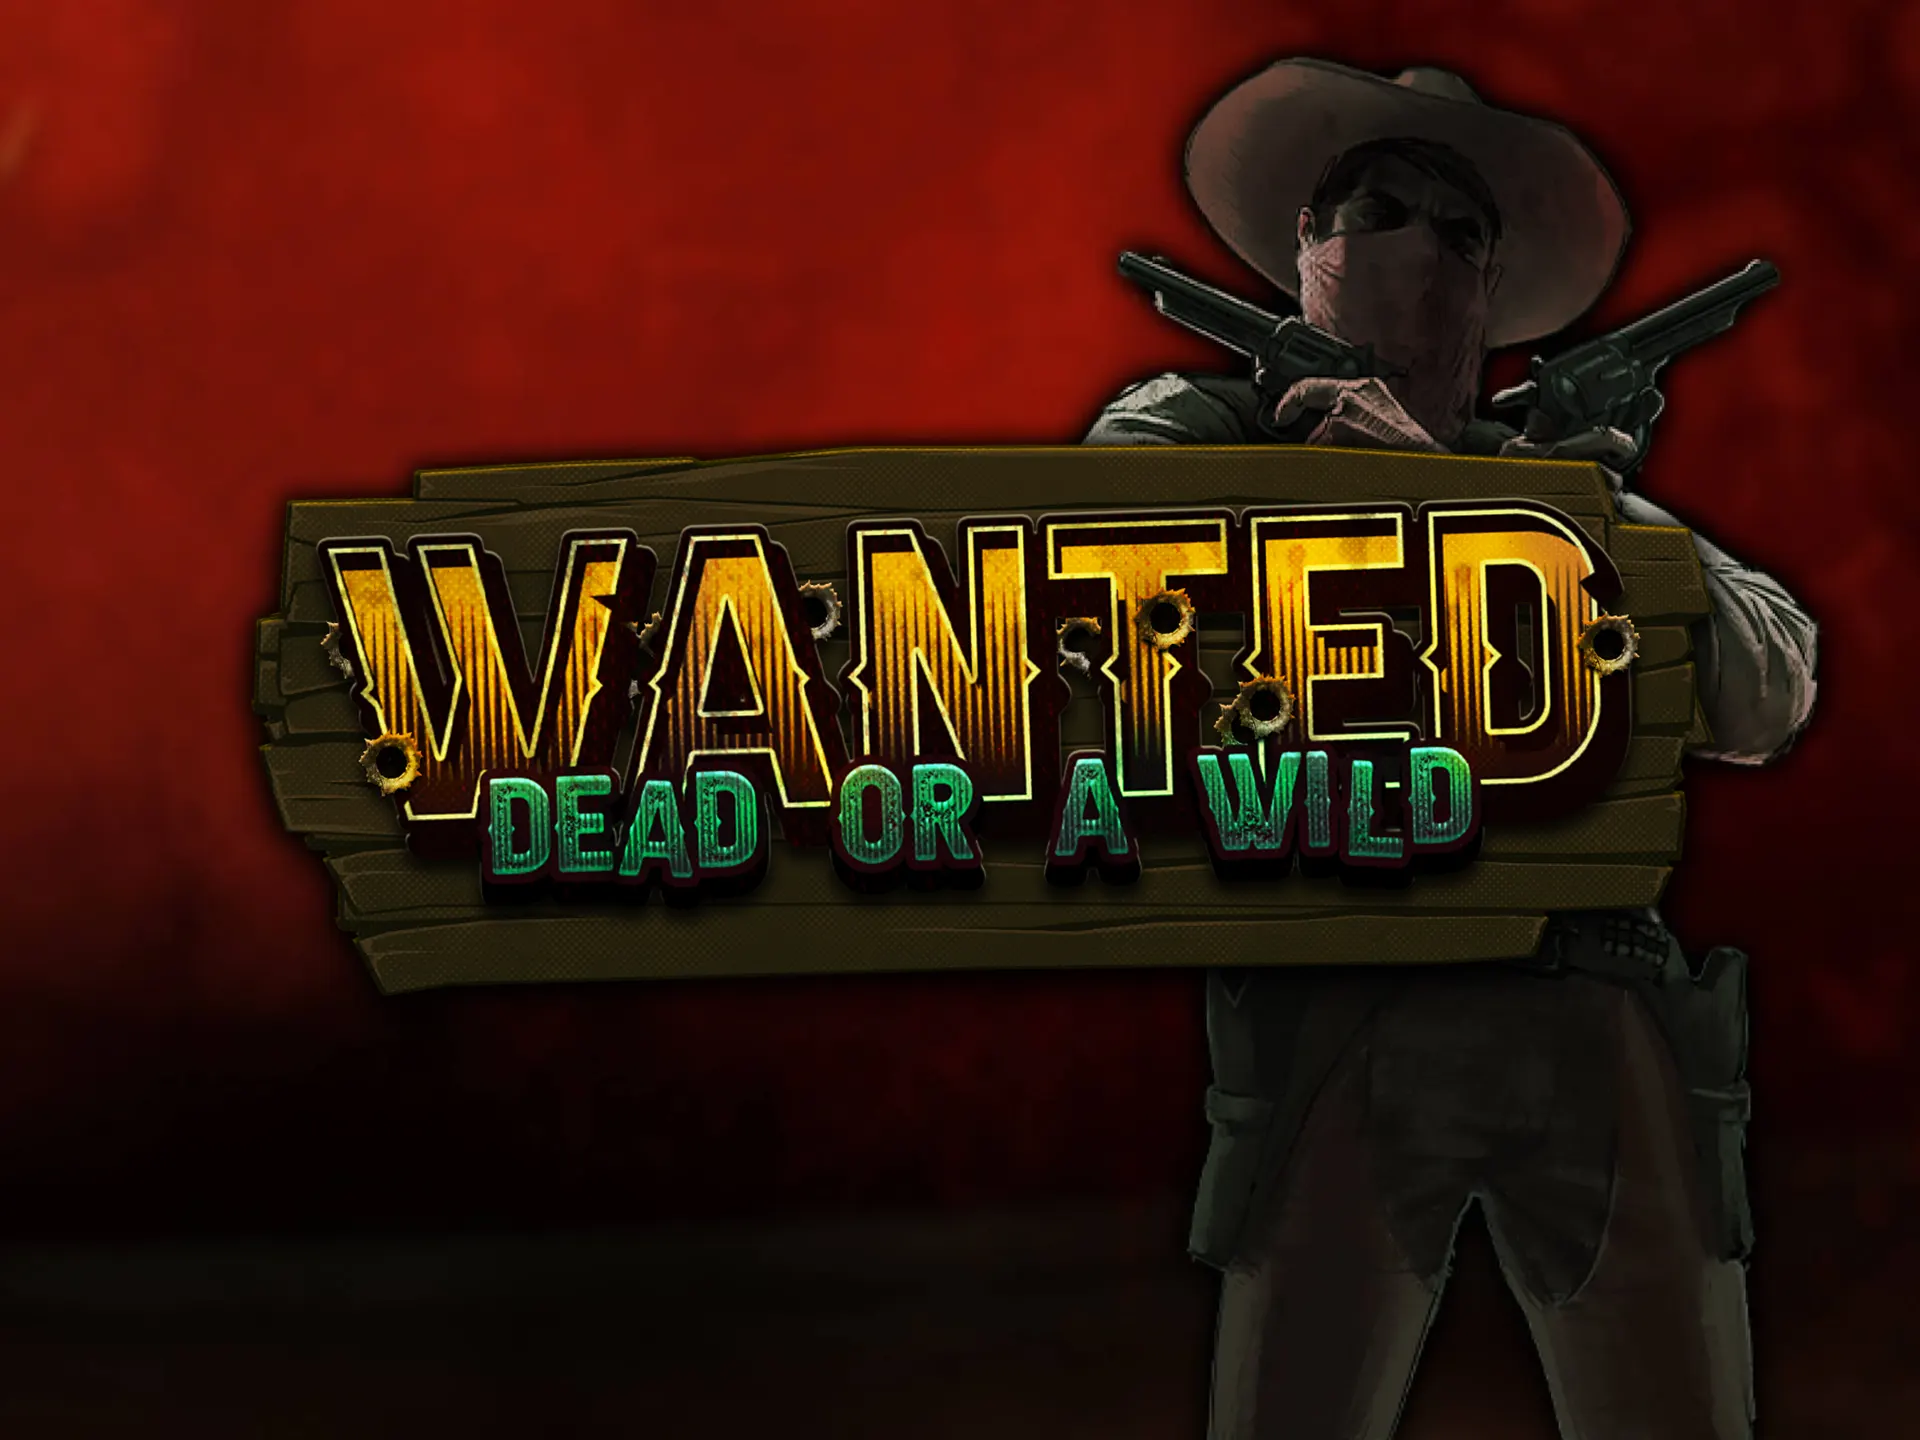 Seach for bandit and get money by playing Dead or a Wild slot.